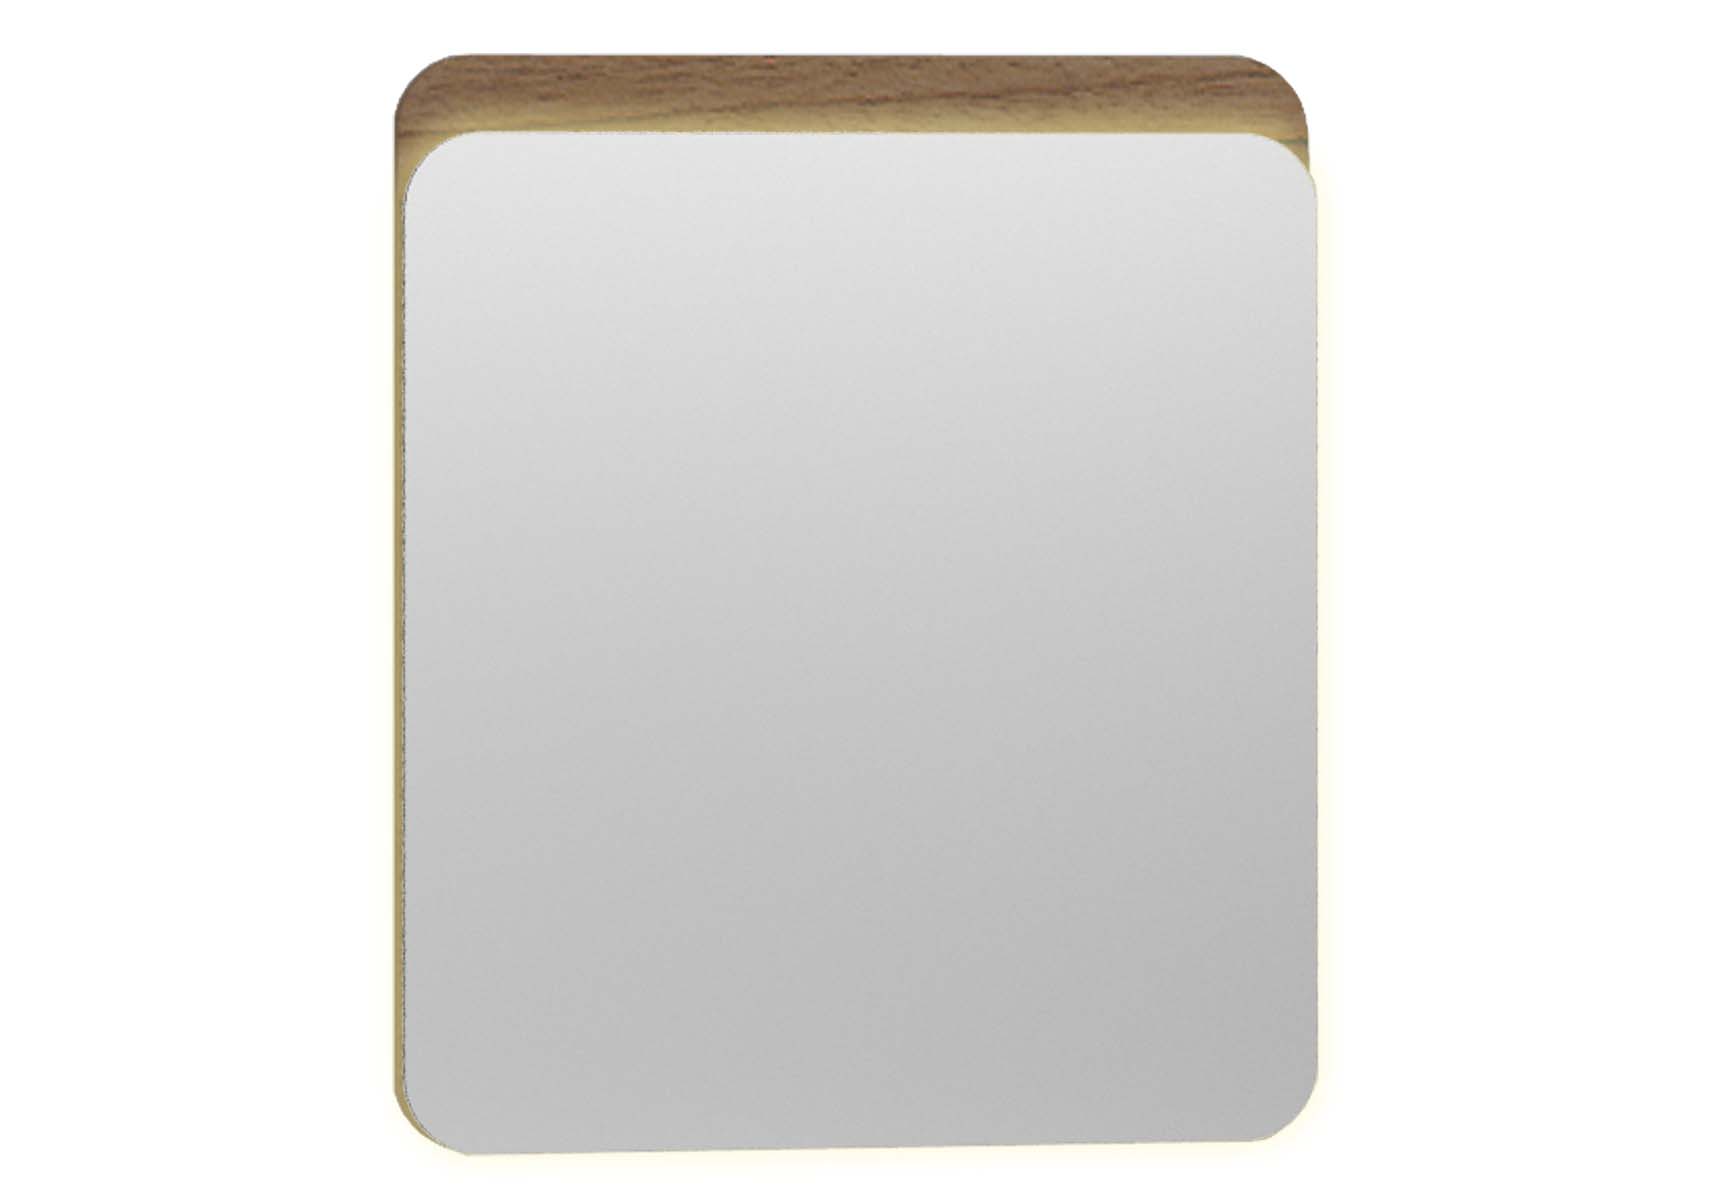 Nest Trendy Flat Mirror with Led 60 cm, Waved Natural Wood